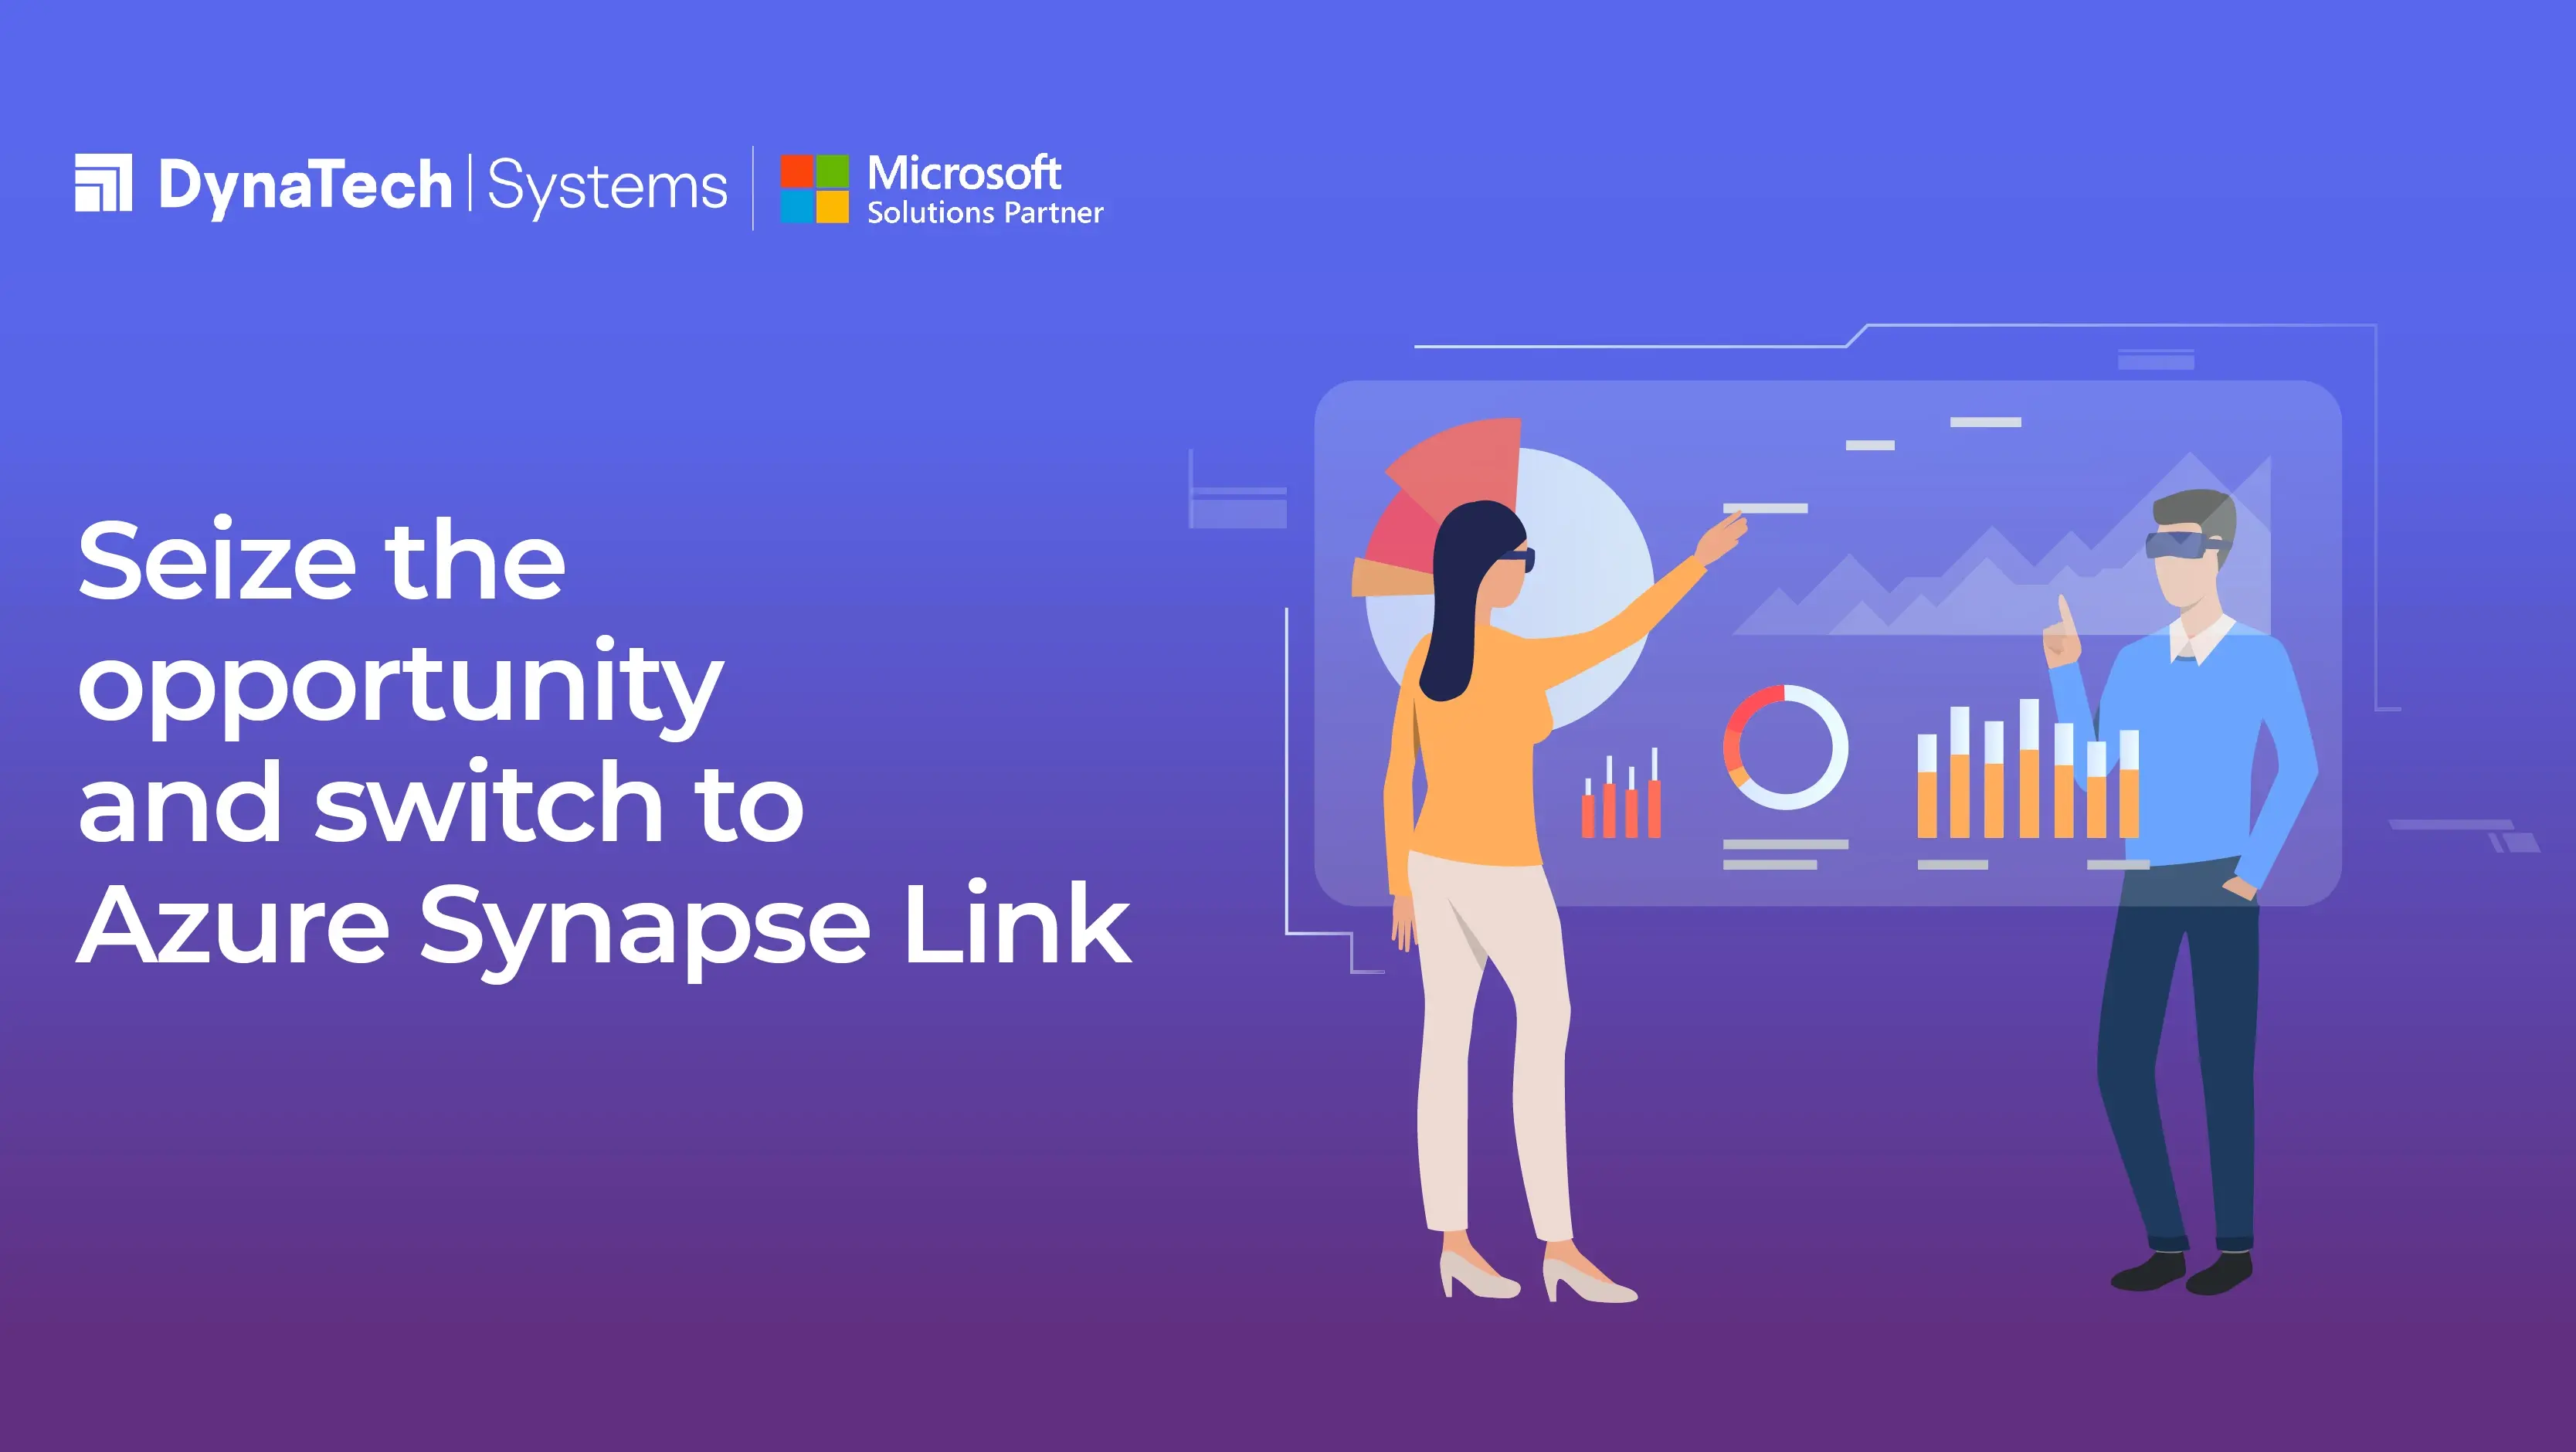 Seize the opportunity and switch to Azure Synapse Link